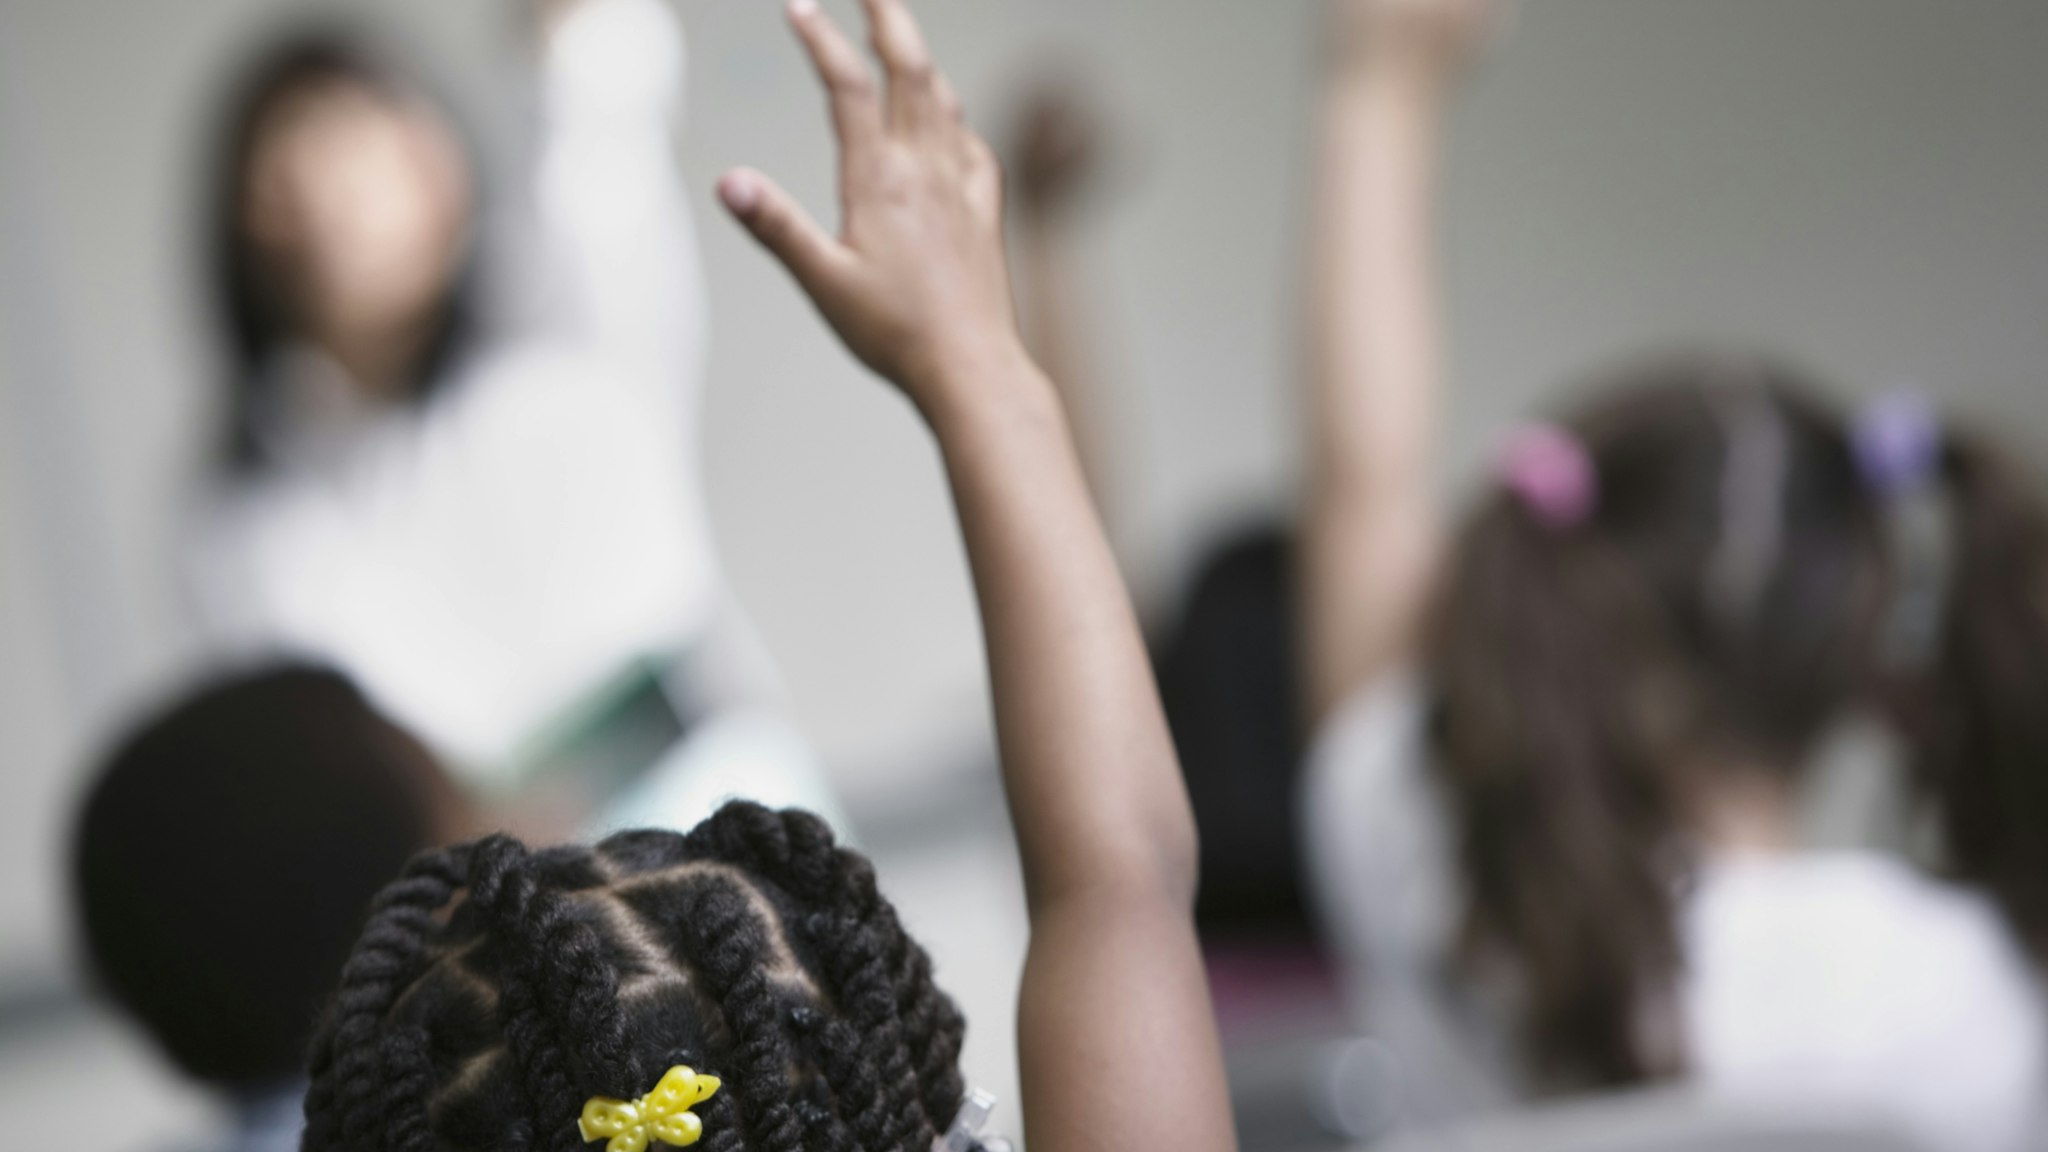 Children in class with raised hands - stock photo